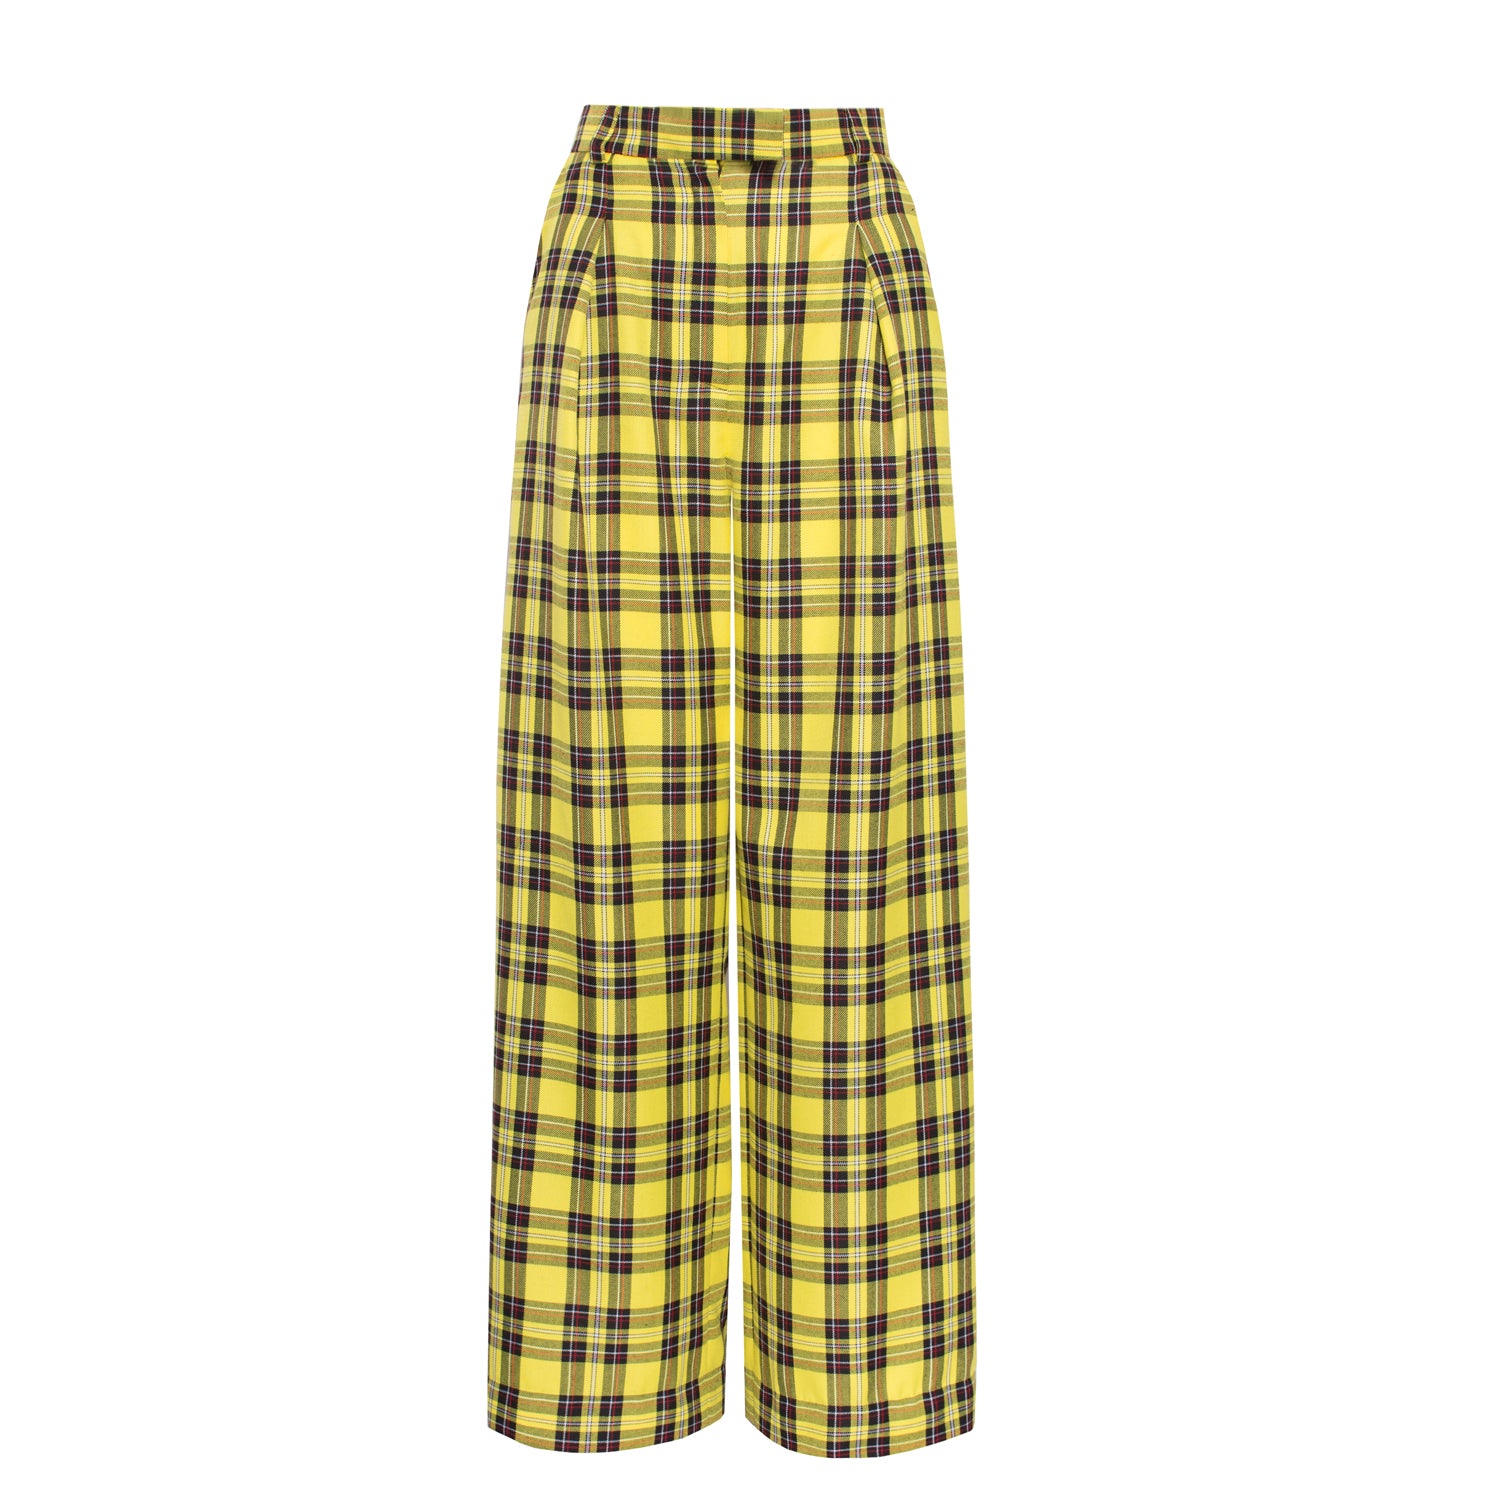 Reality Check Yellow high-rise trousers - VOLS & ORIGINAL